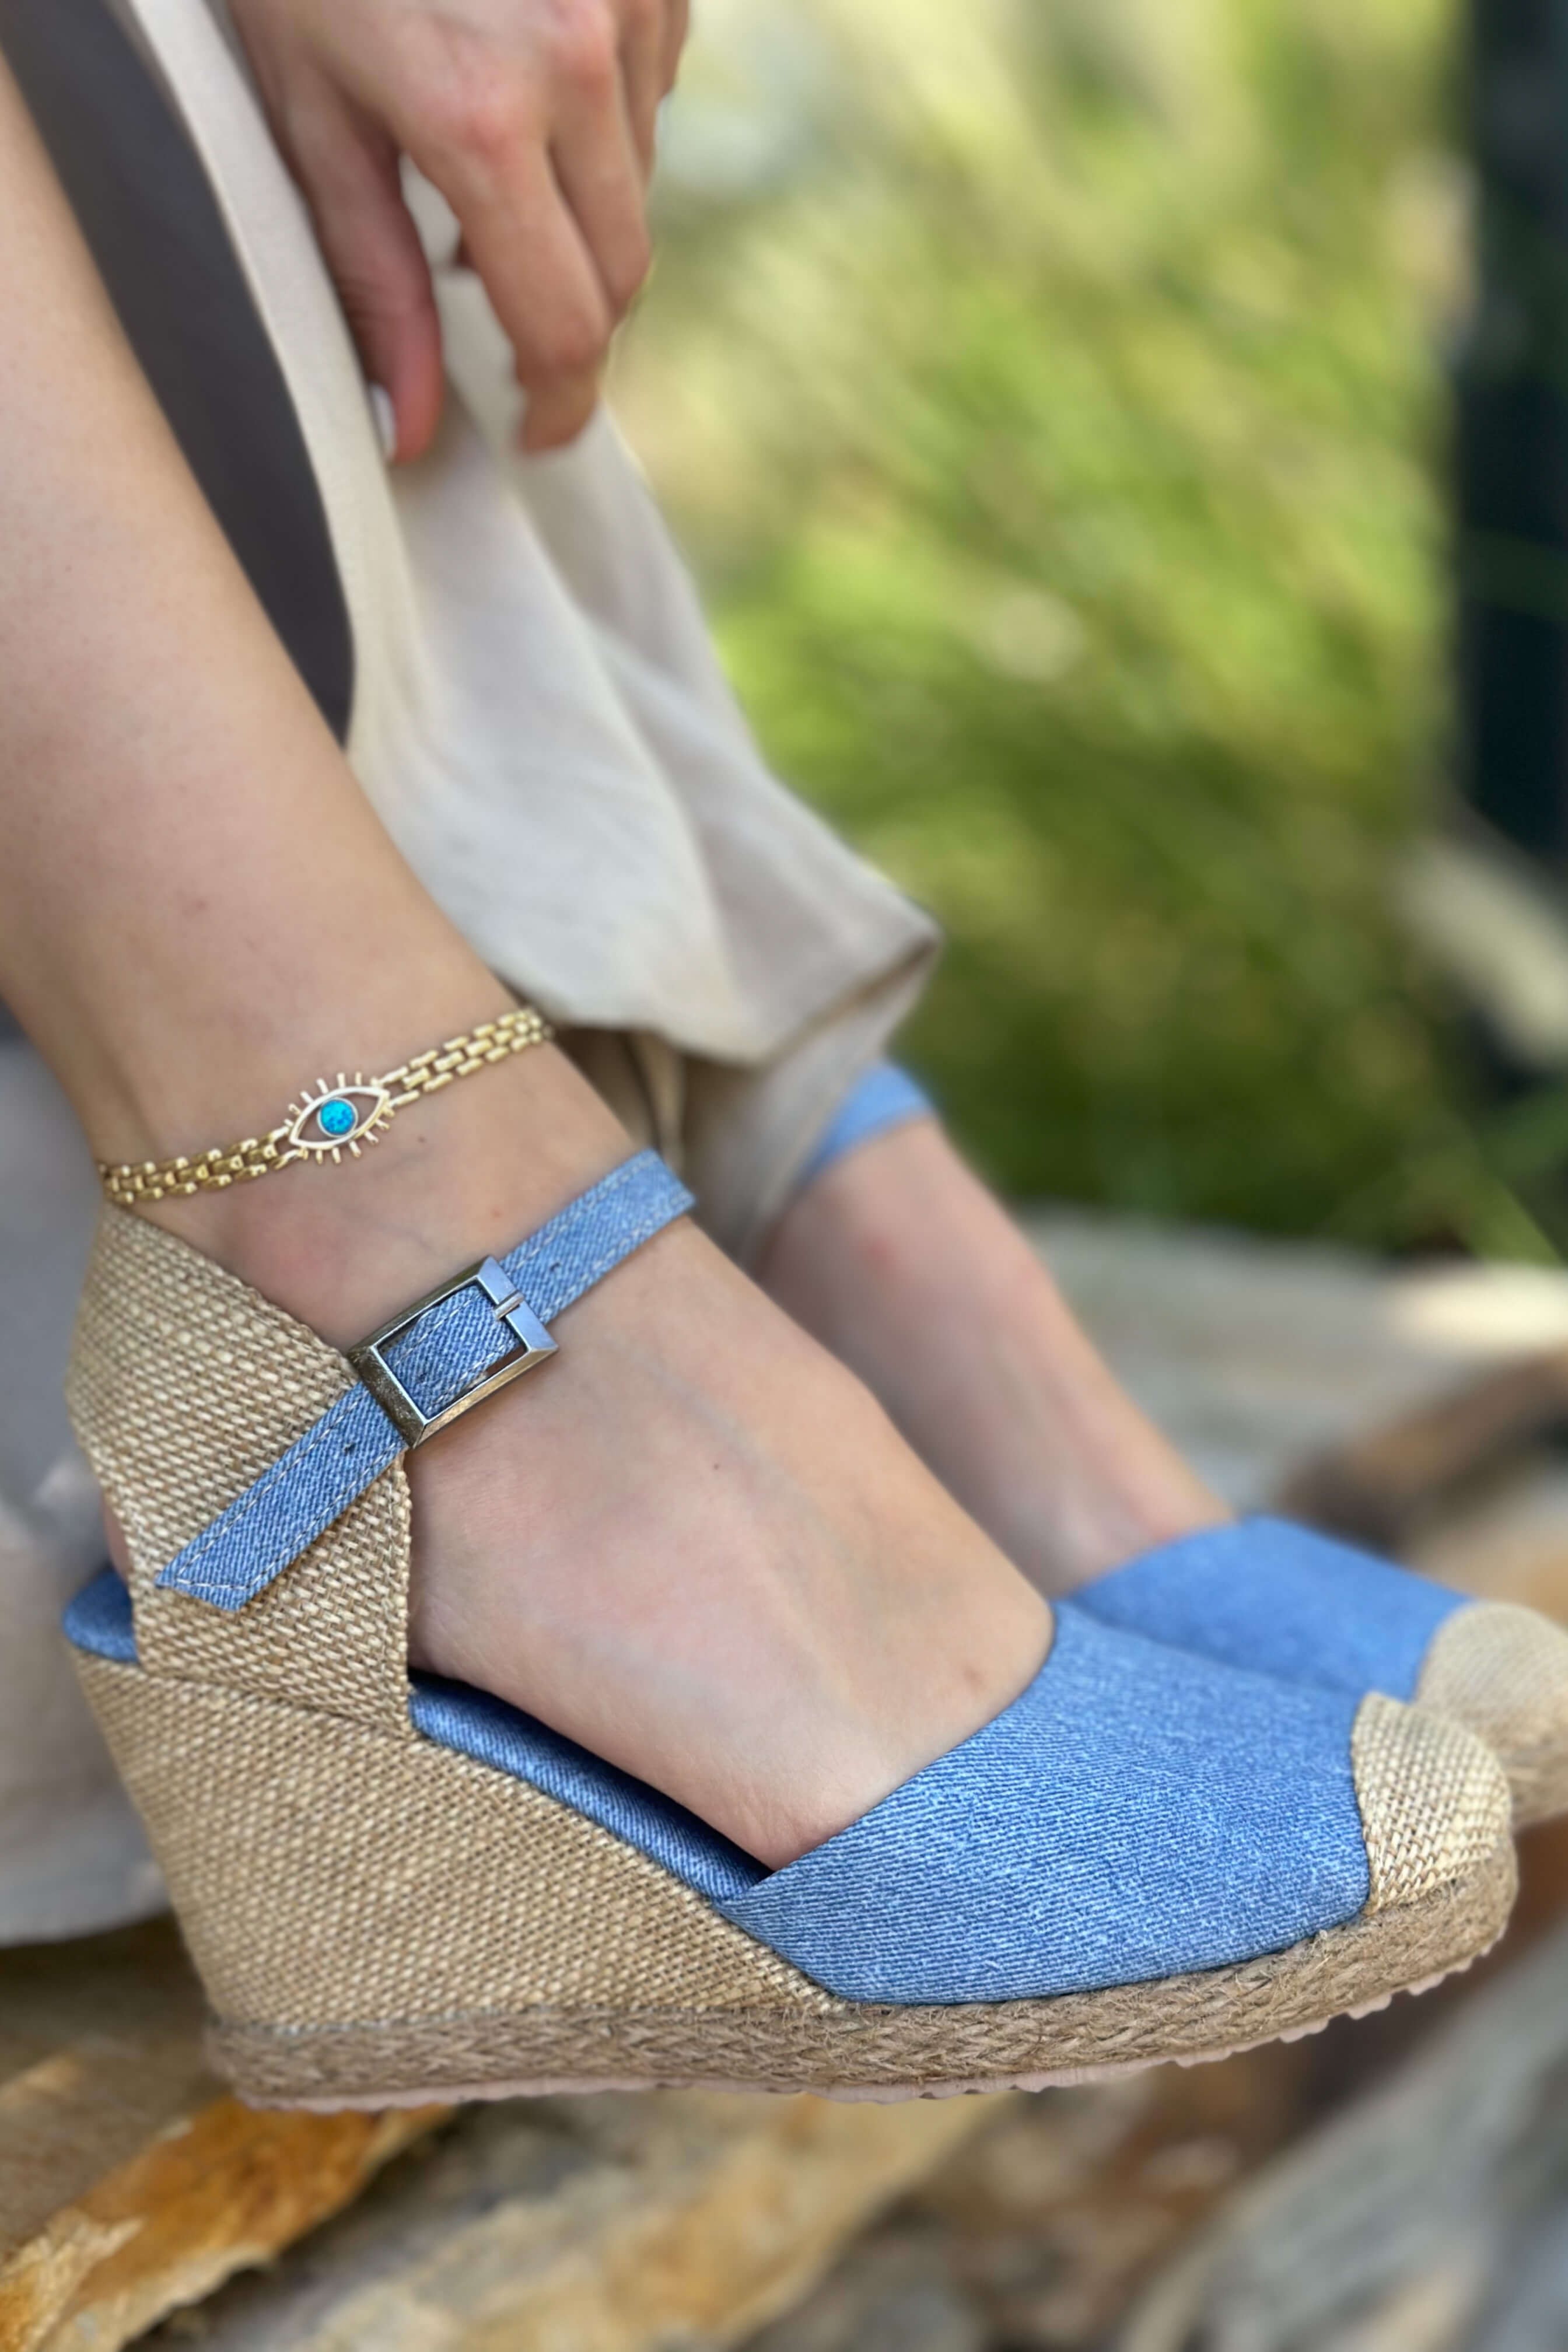 5 Sandals to Wear With Women's Jeans